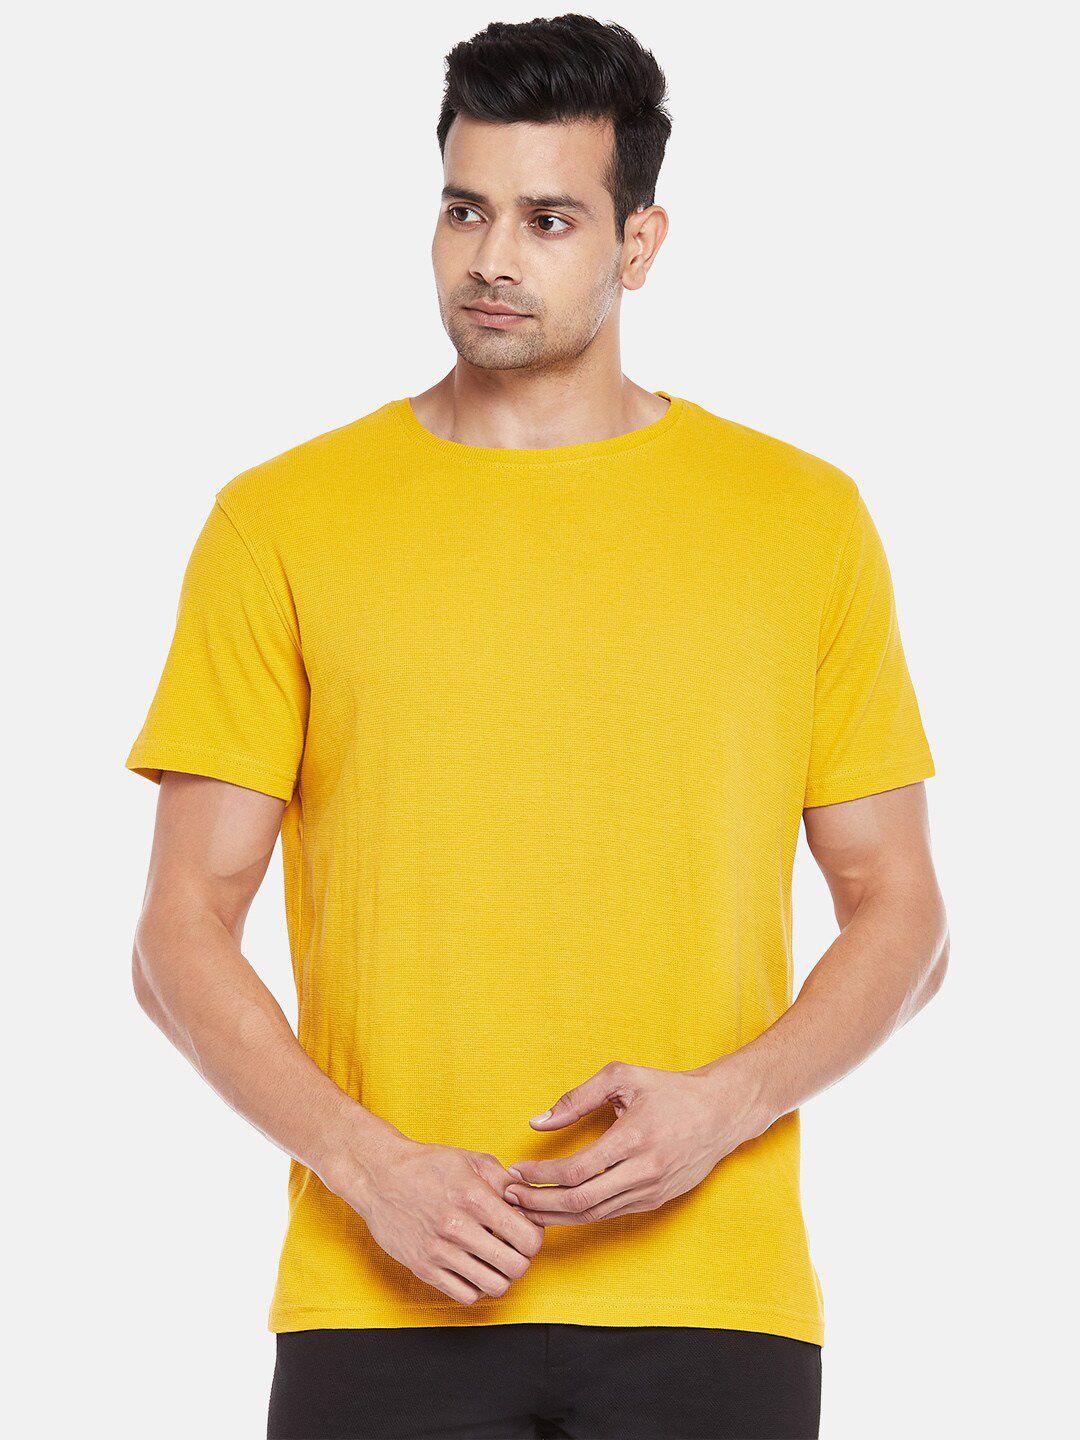 byford-by-pantaloons-men-yellow-solid-slim-fit-t-shirt